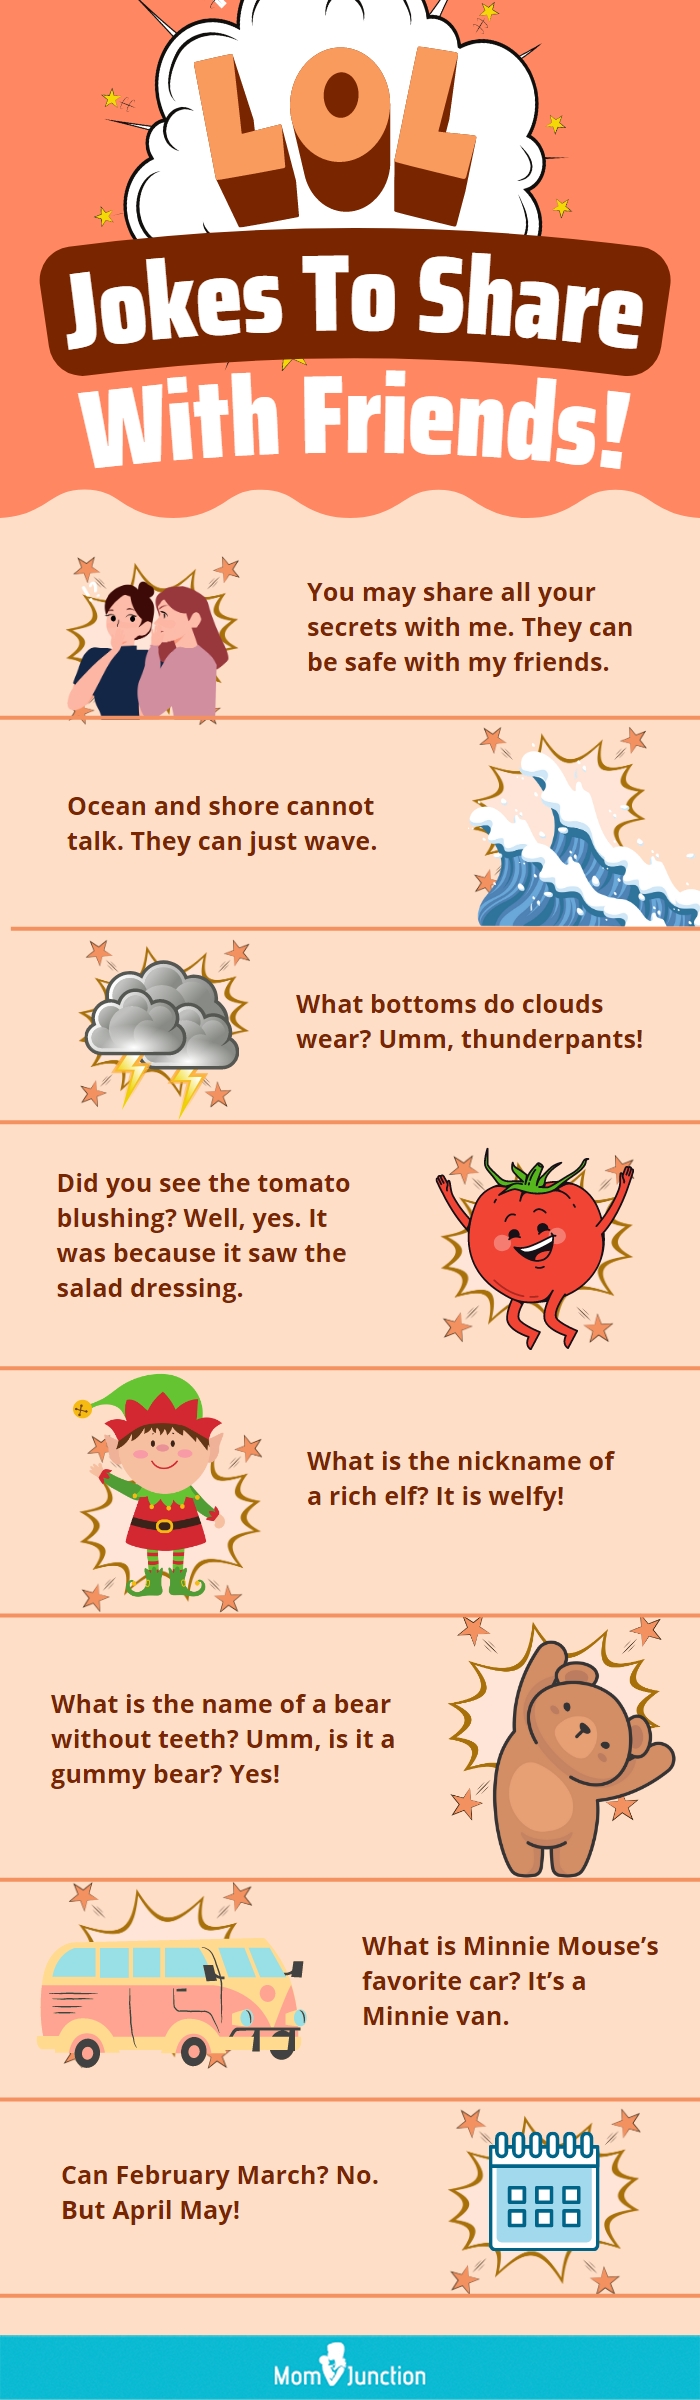 funniest jokes to tell friends (infographic)